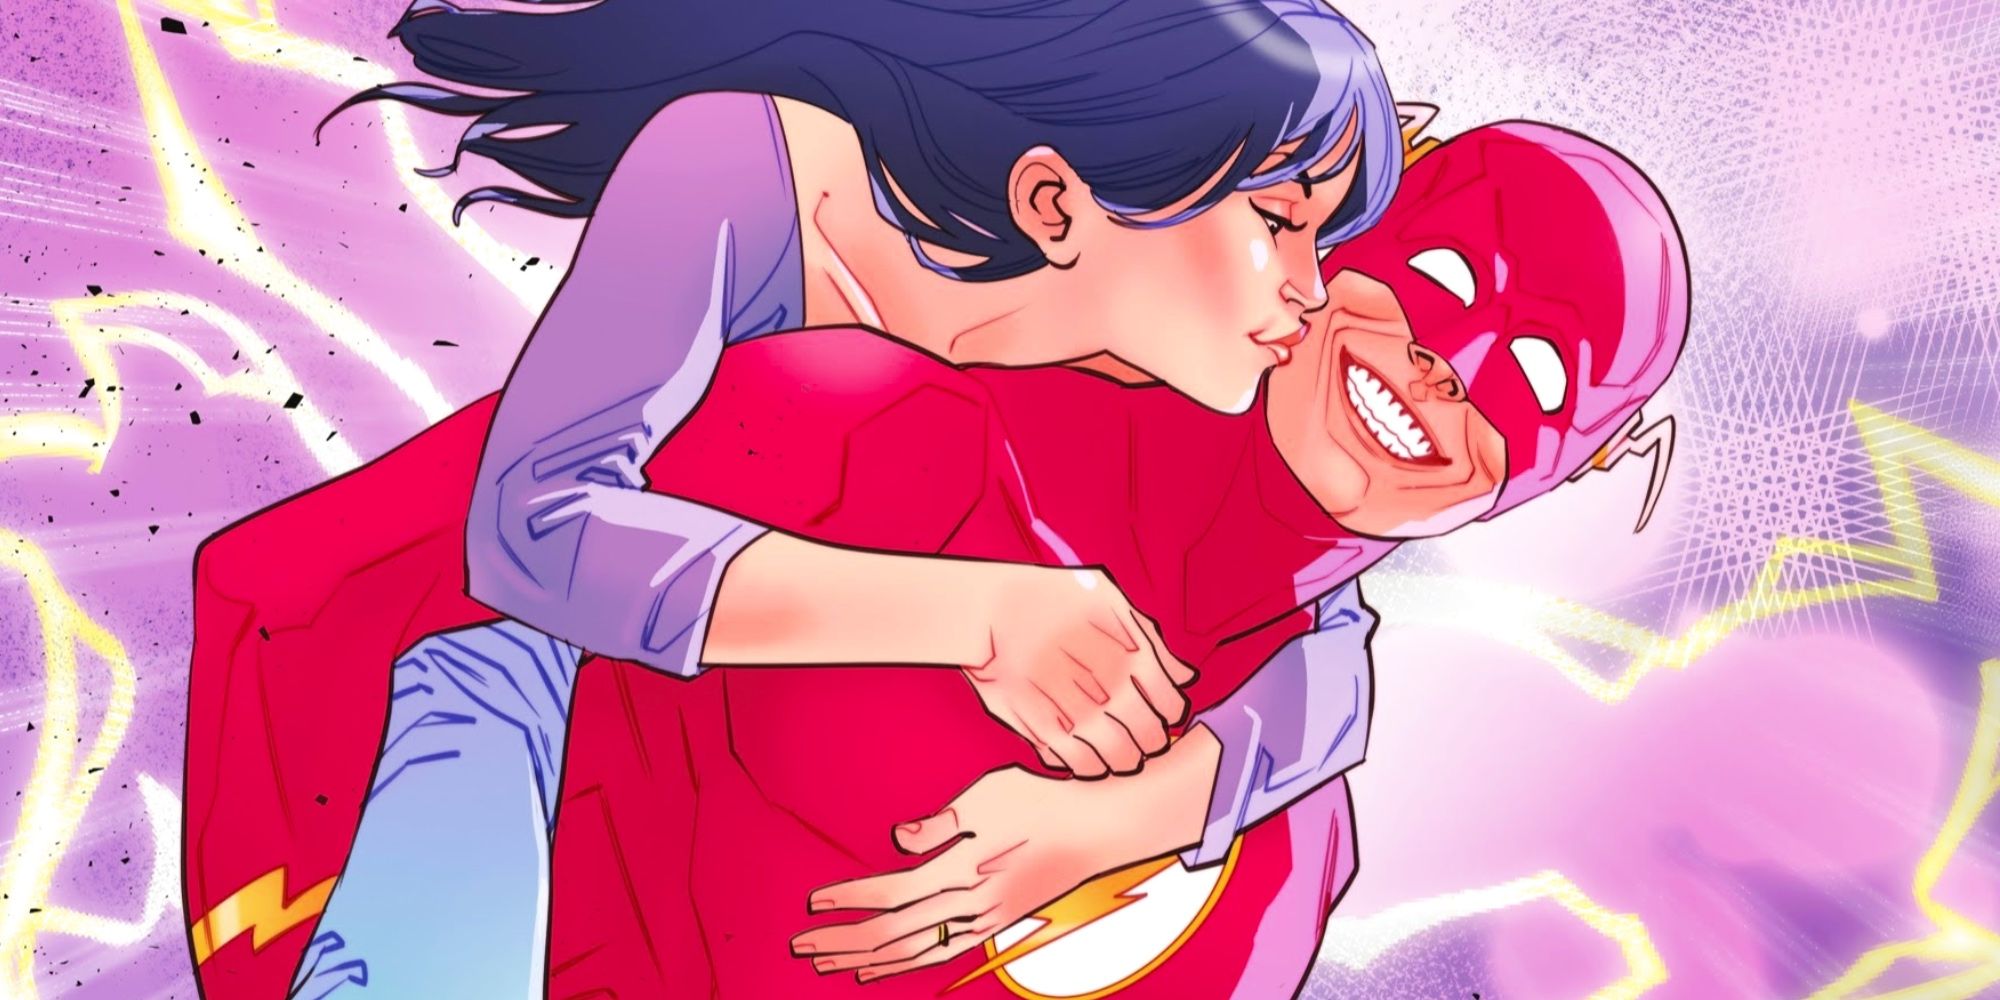 Wally West's Flash and Linda Park-West in DC Comics